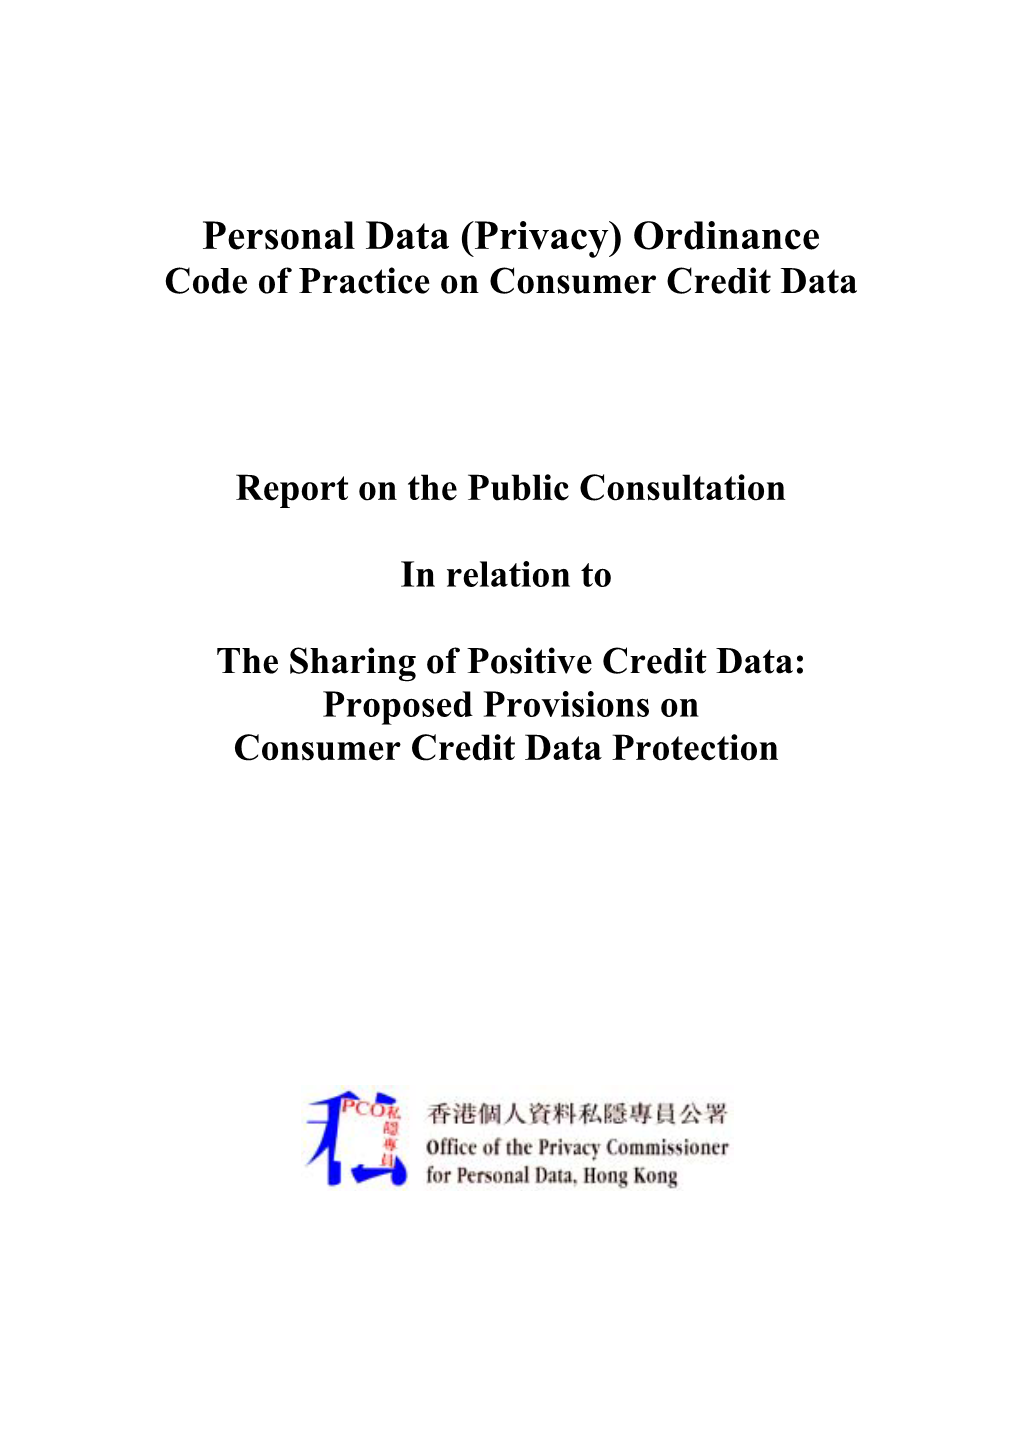 Personal Data (Privacy) Ordinance Code of Practice on Consumer Credit Data